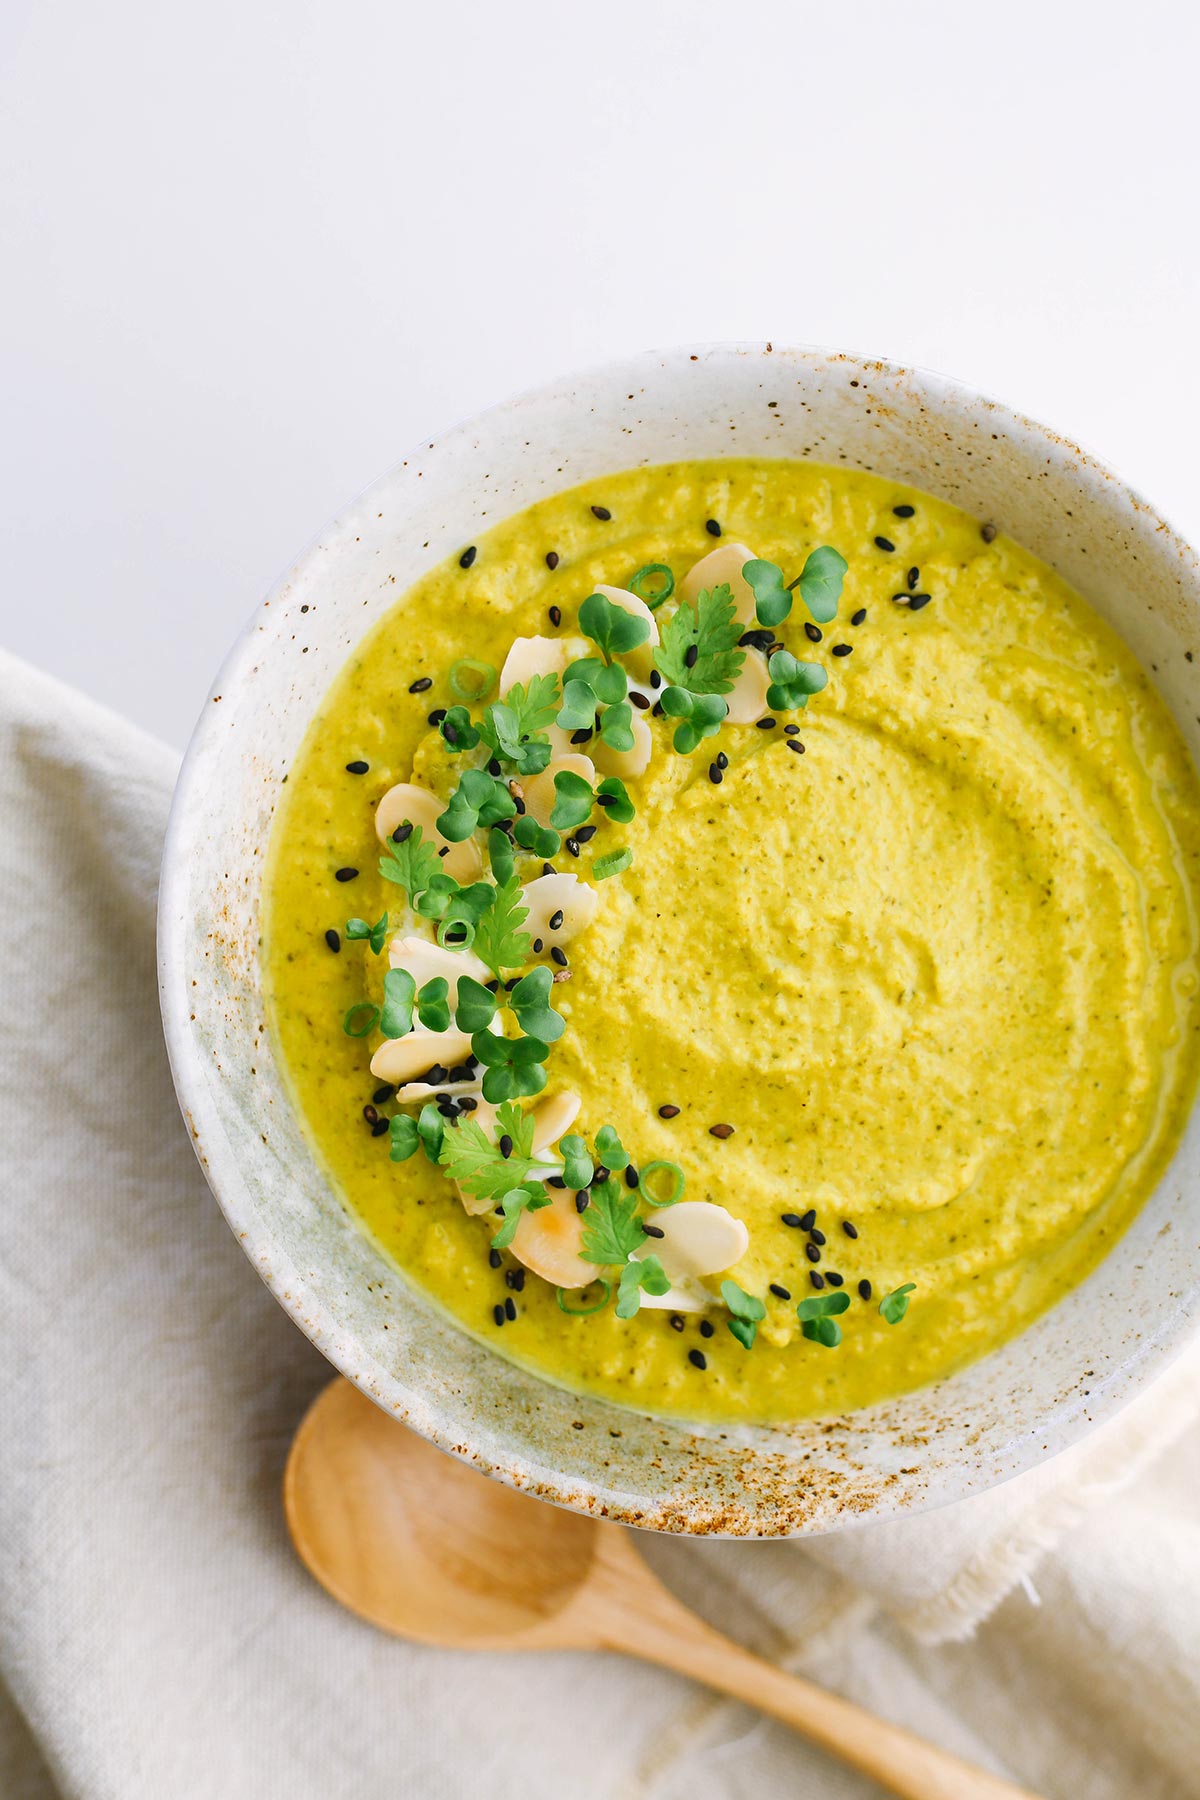 Keto broccoli soup for low carb. Easy recipe with turmeric and ginger.